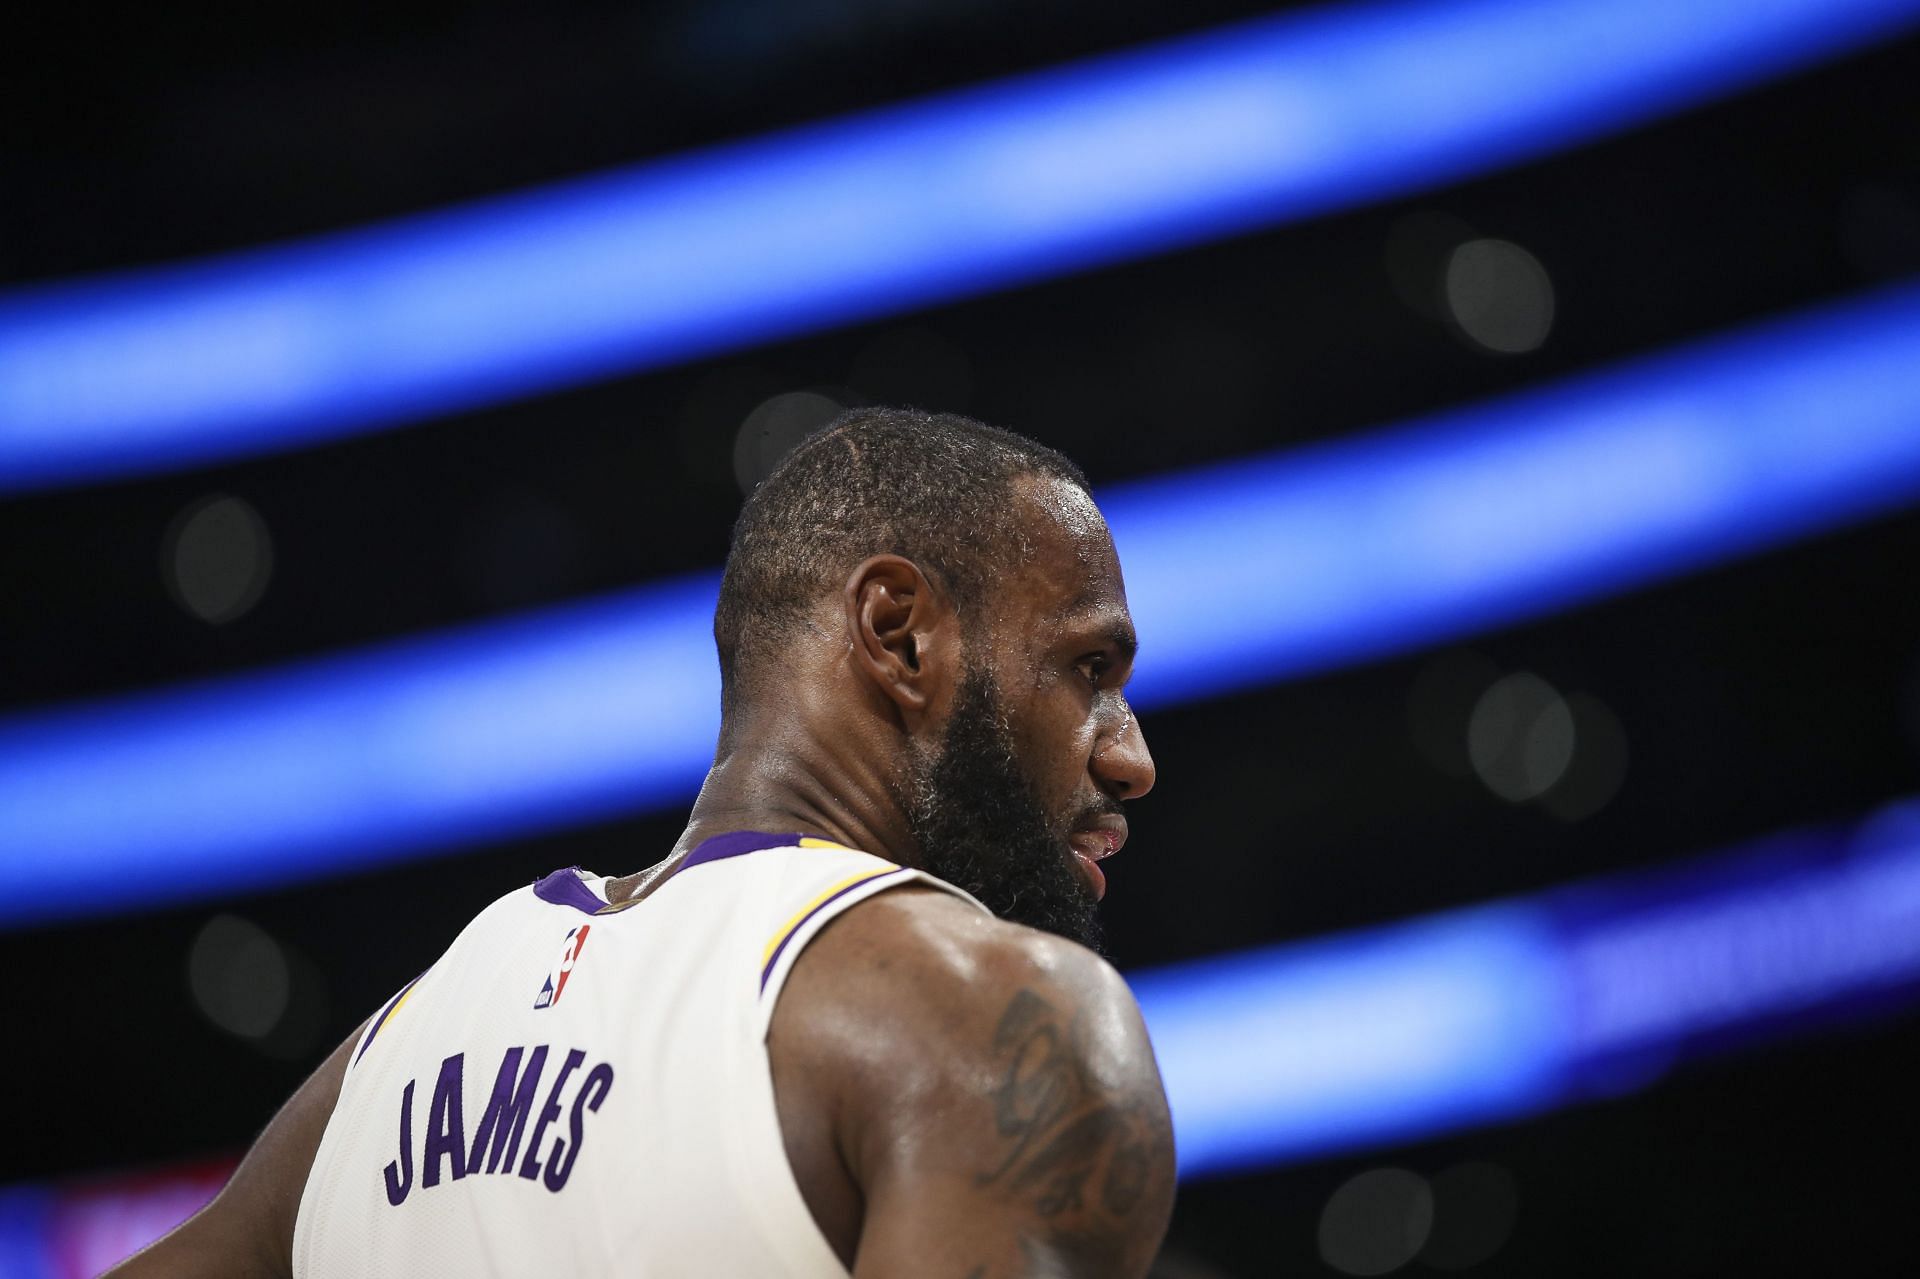 LeBron James has received a ton of flak for posting ill-advised tweets.